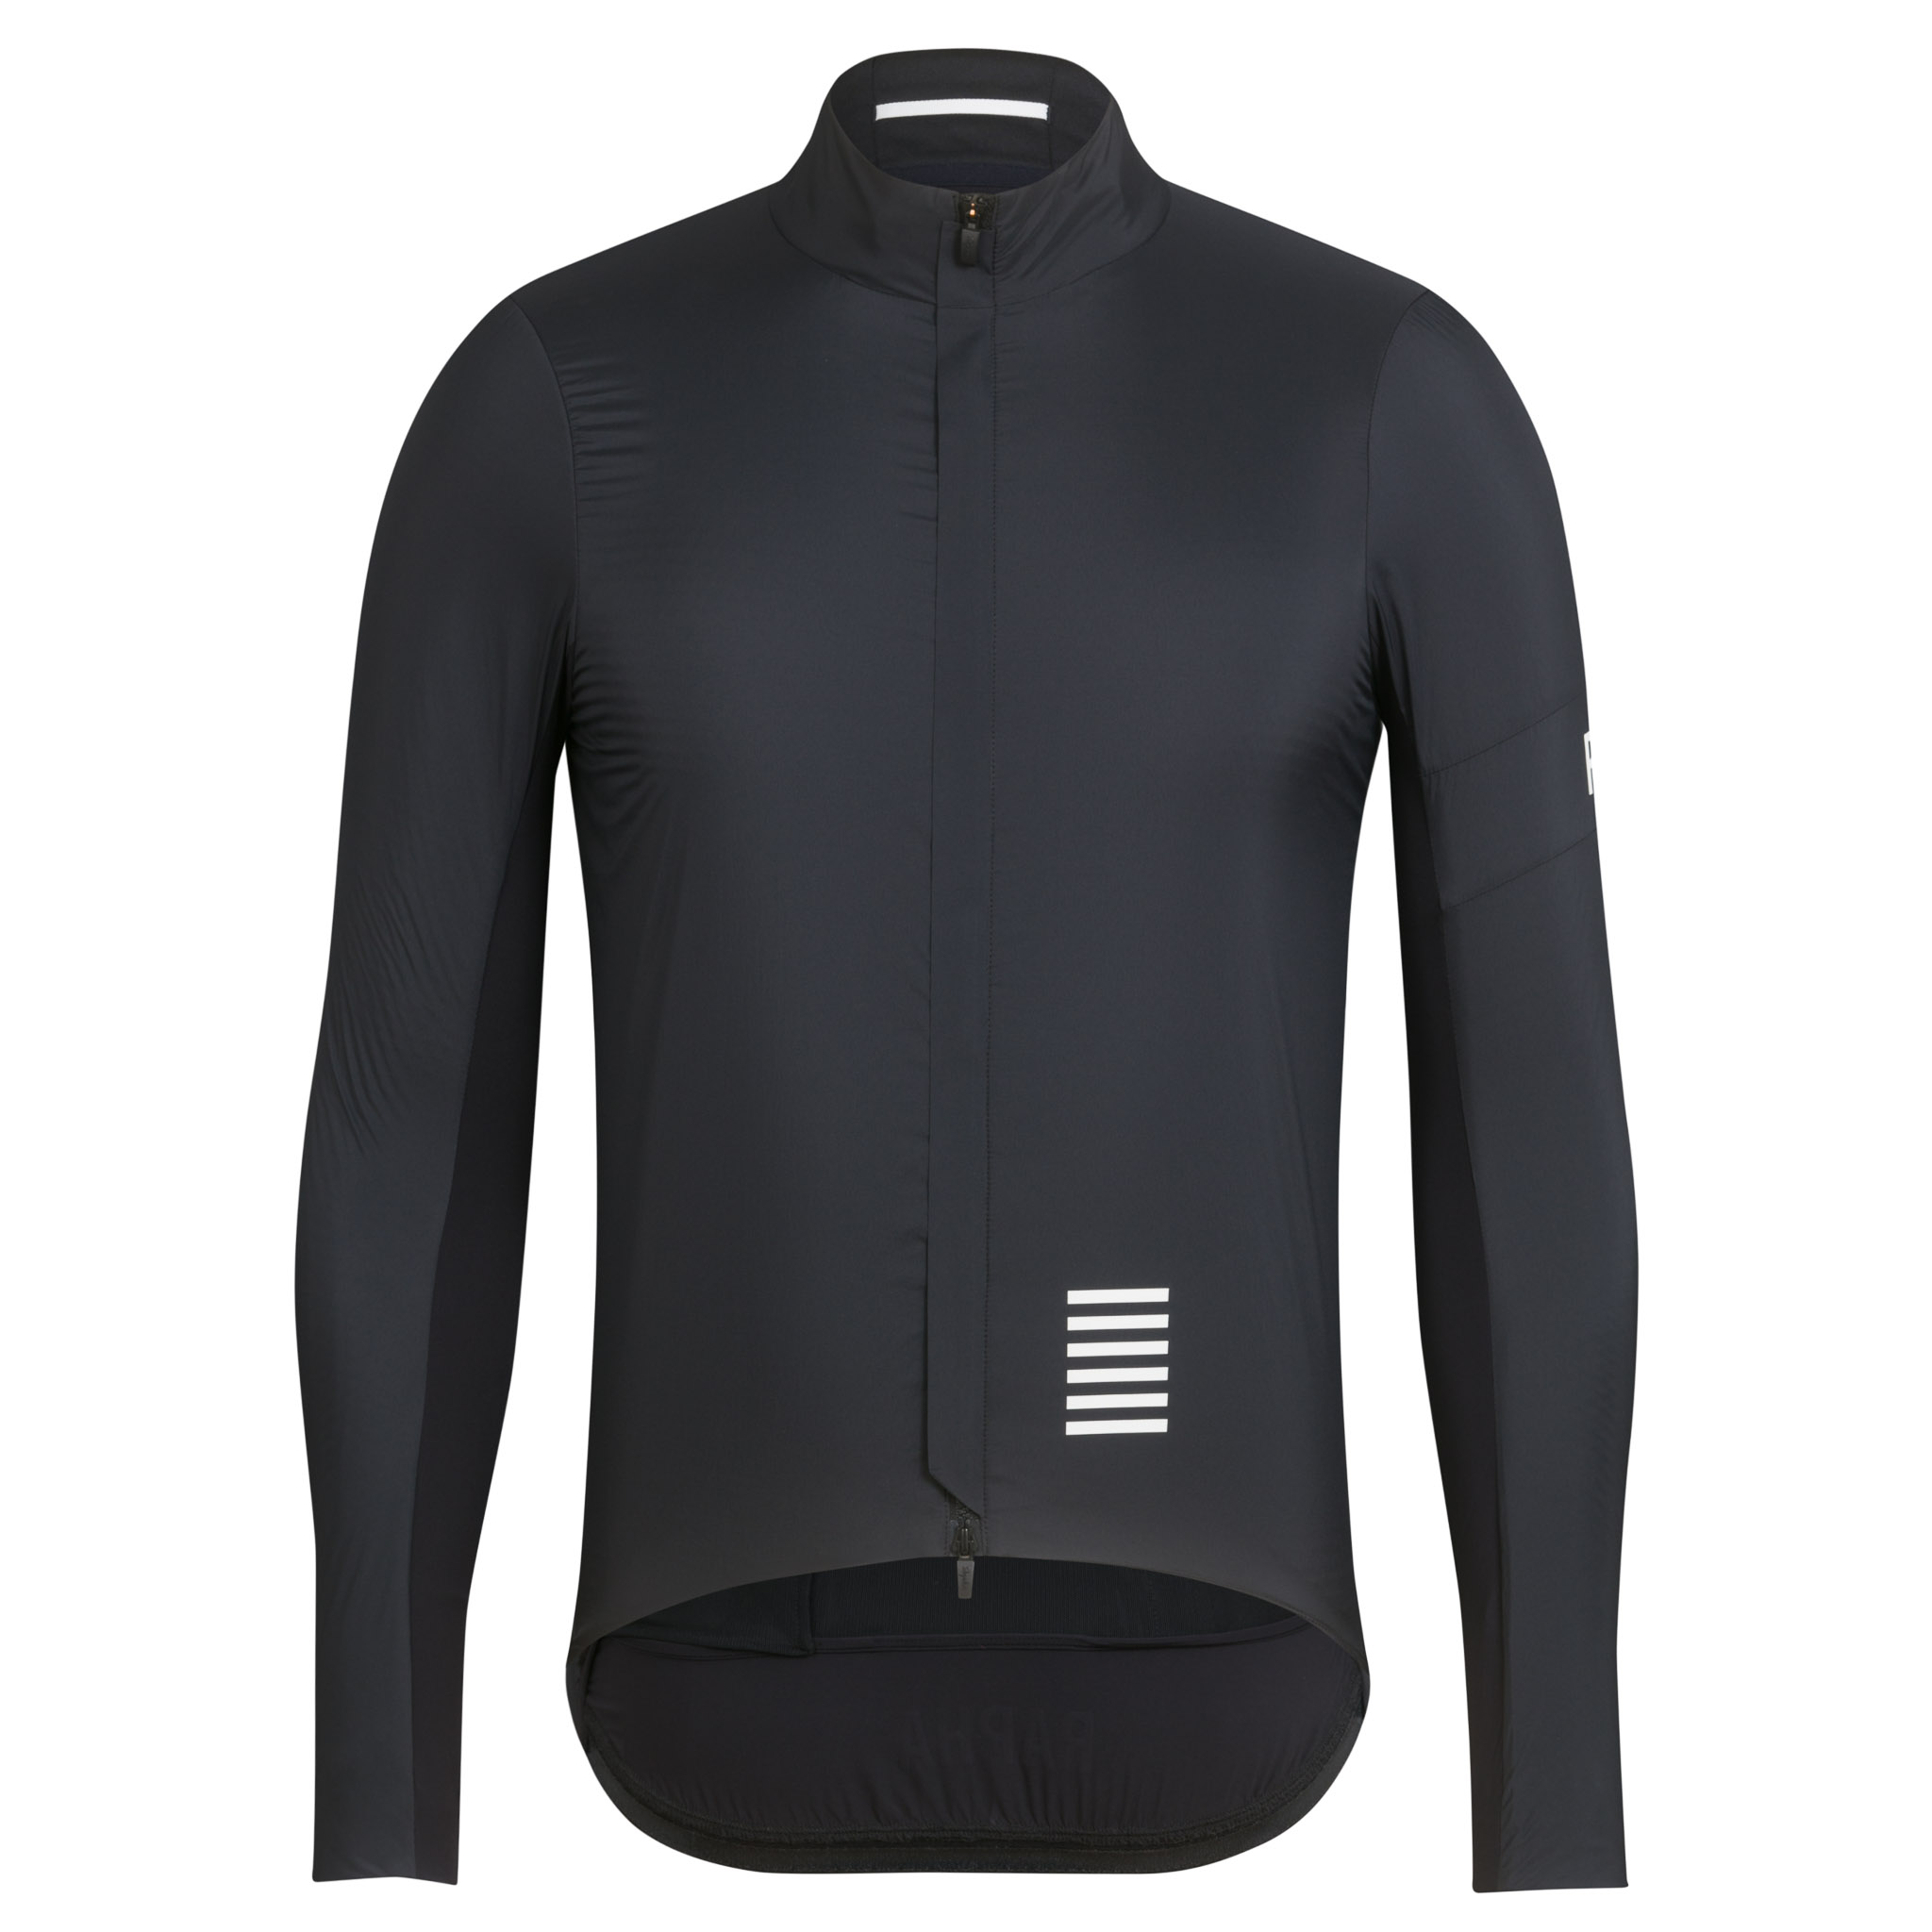 Men's Pro Team Insulated Cycling Jacket for Winter | Rapha